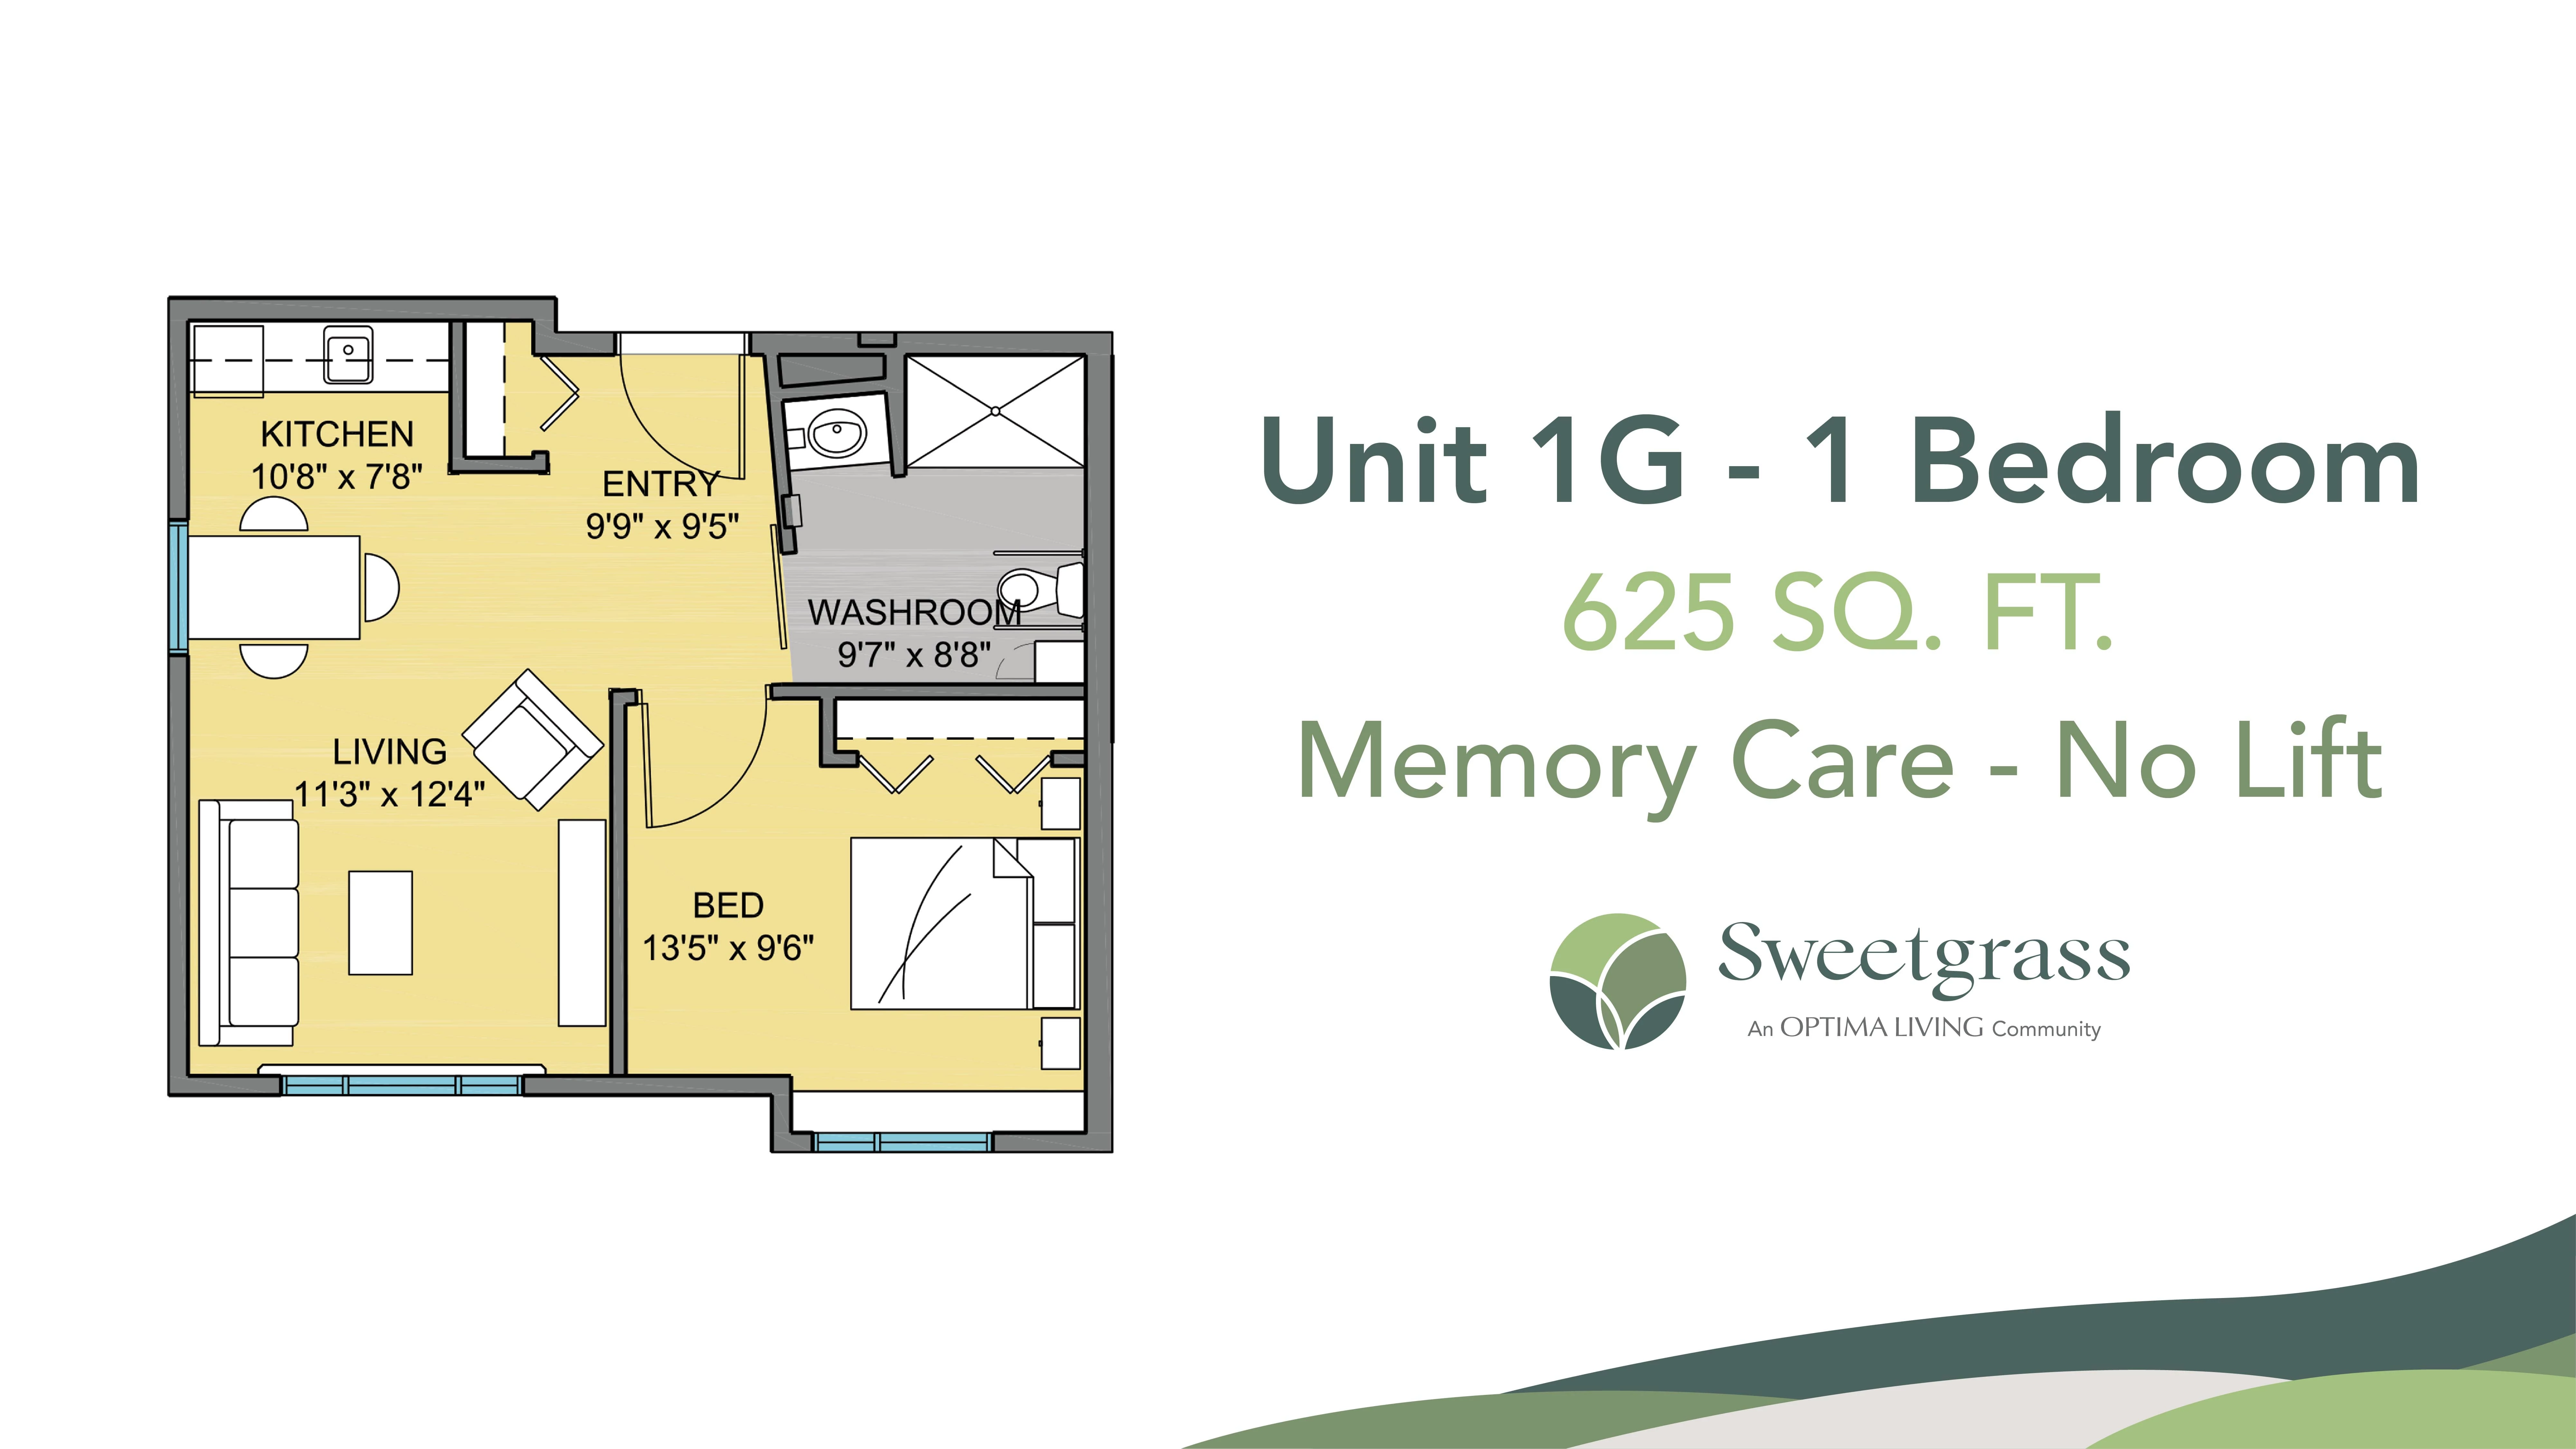 Floor plan for a Sweetgrass one bedroom suite